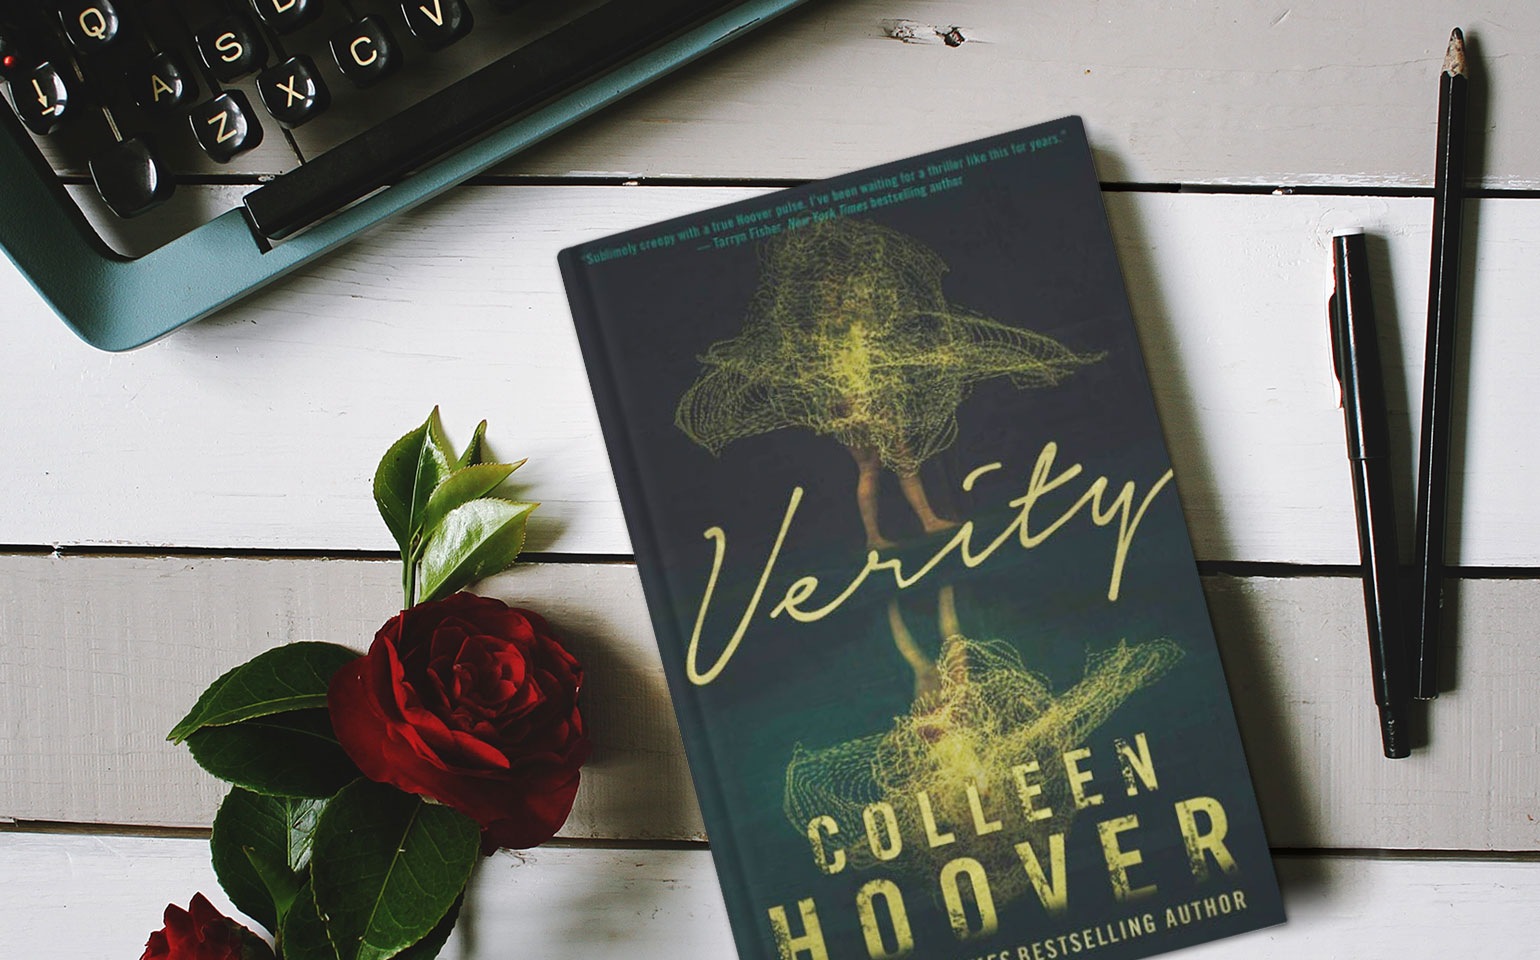 The cover of Colleen Hoover's Verity is shown, with a body being swallowed up by a golden cloud.